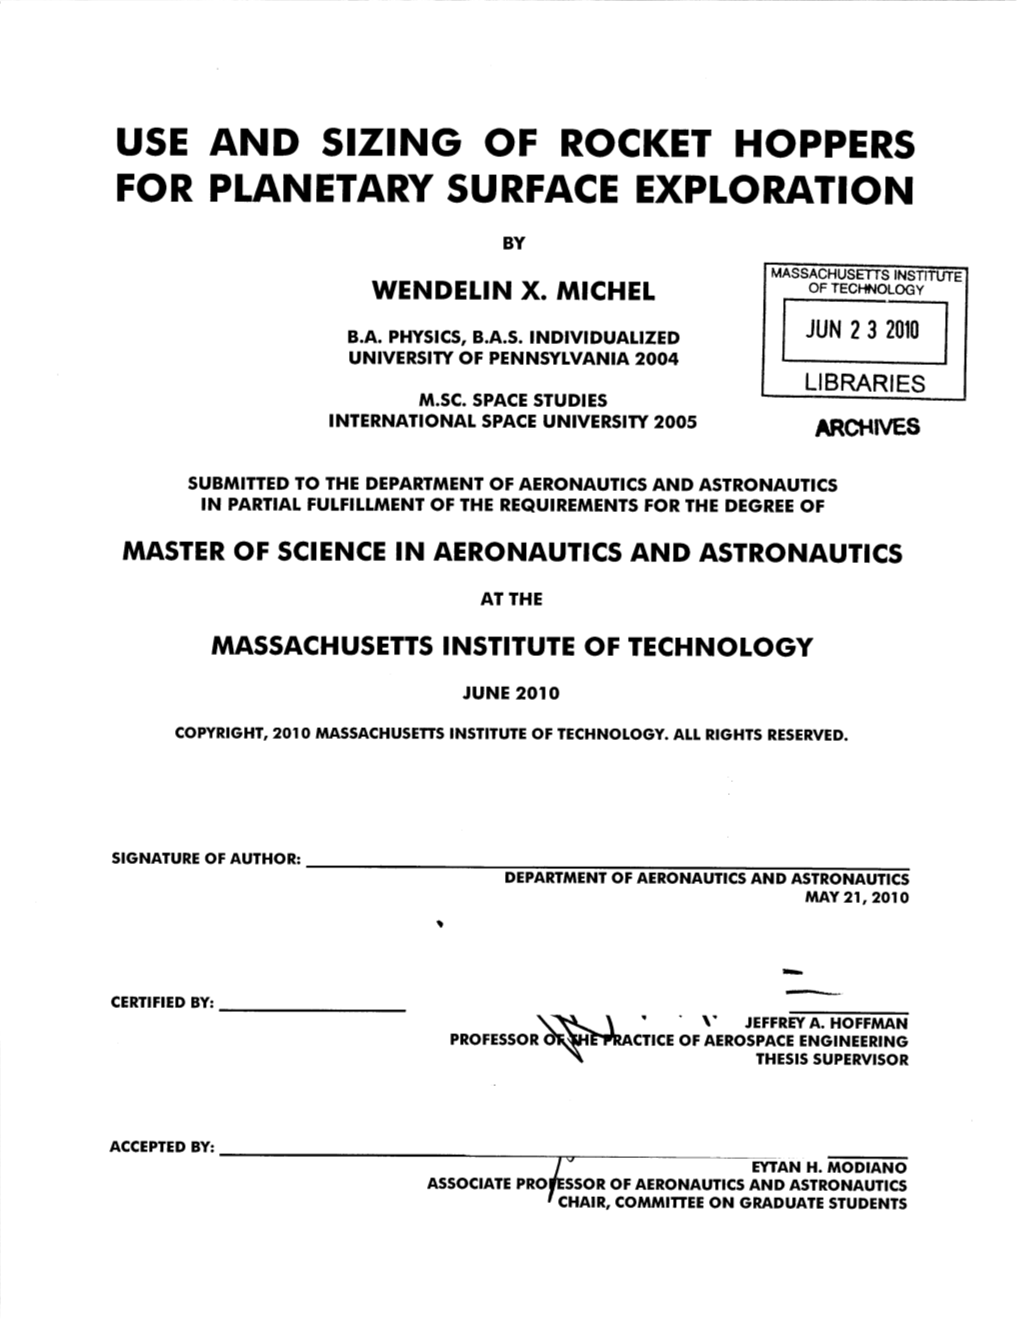 Use and Sizing of Rocket Hoppers for Planetary Surface Exploration